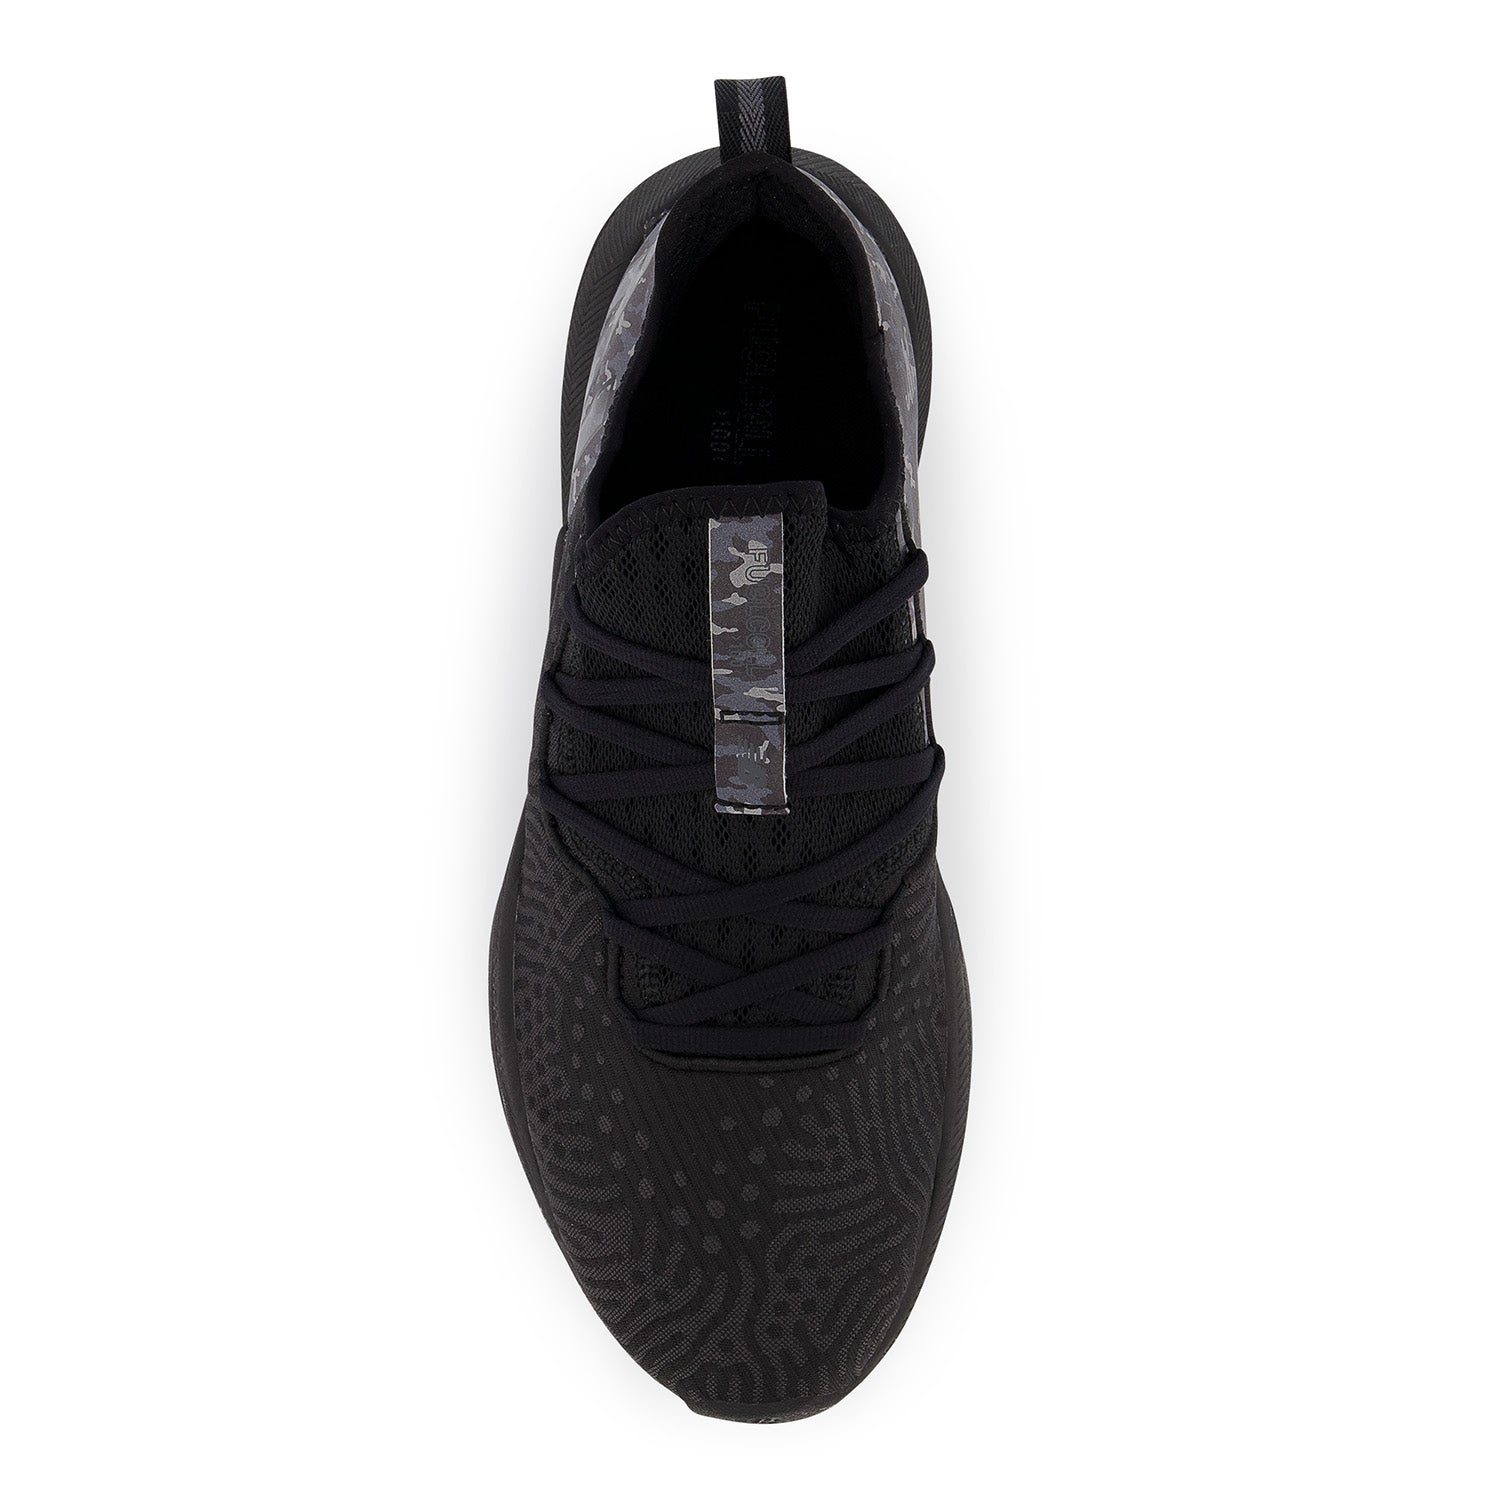 Men's New Balance FuelCell 100 Color: Black with White